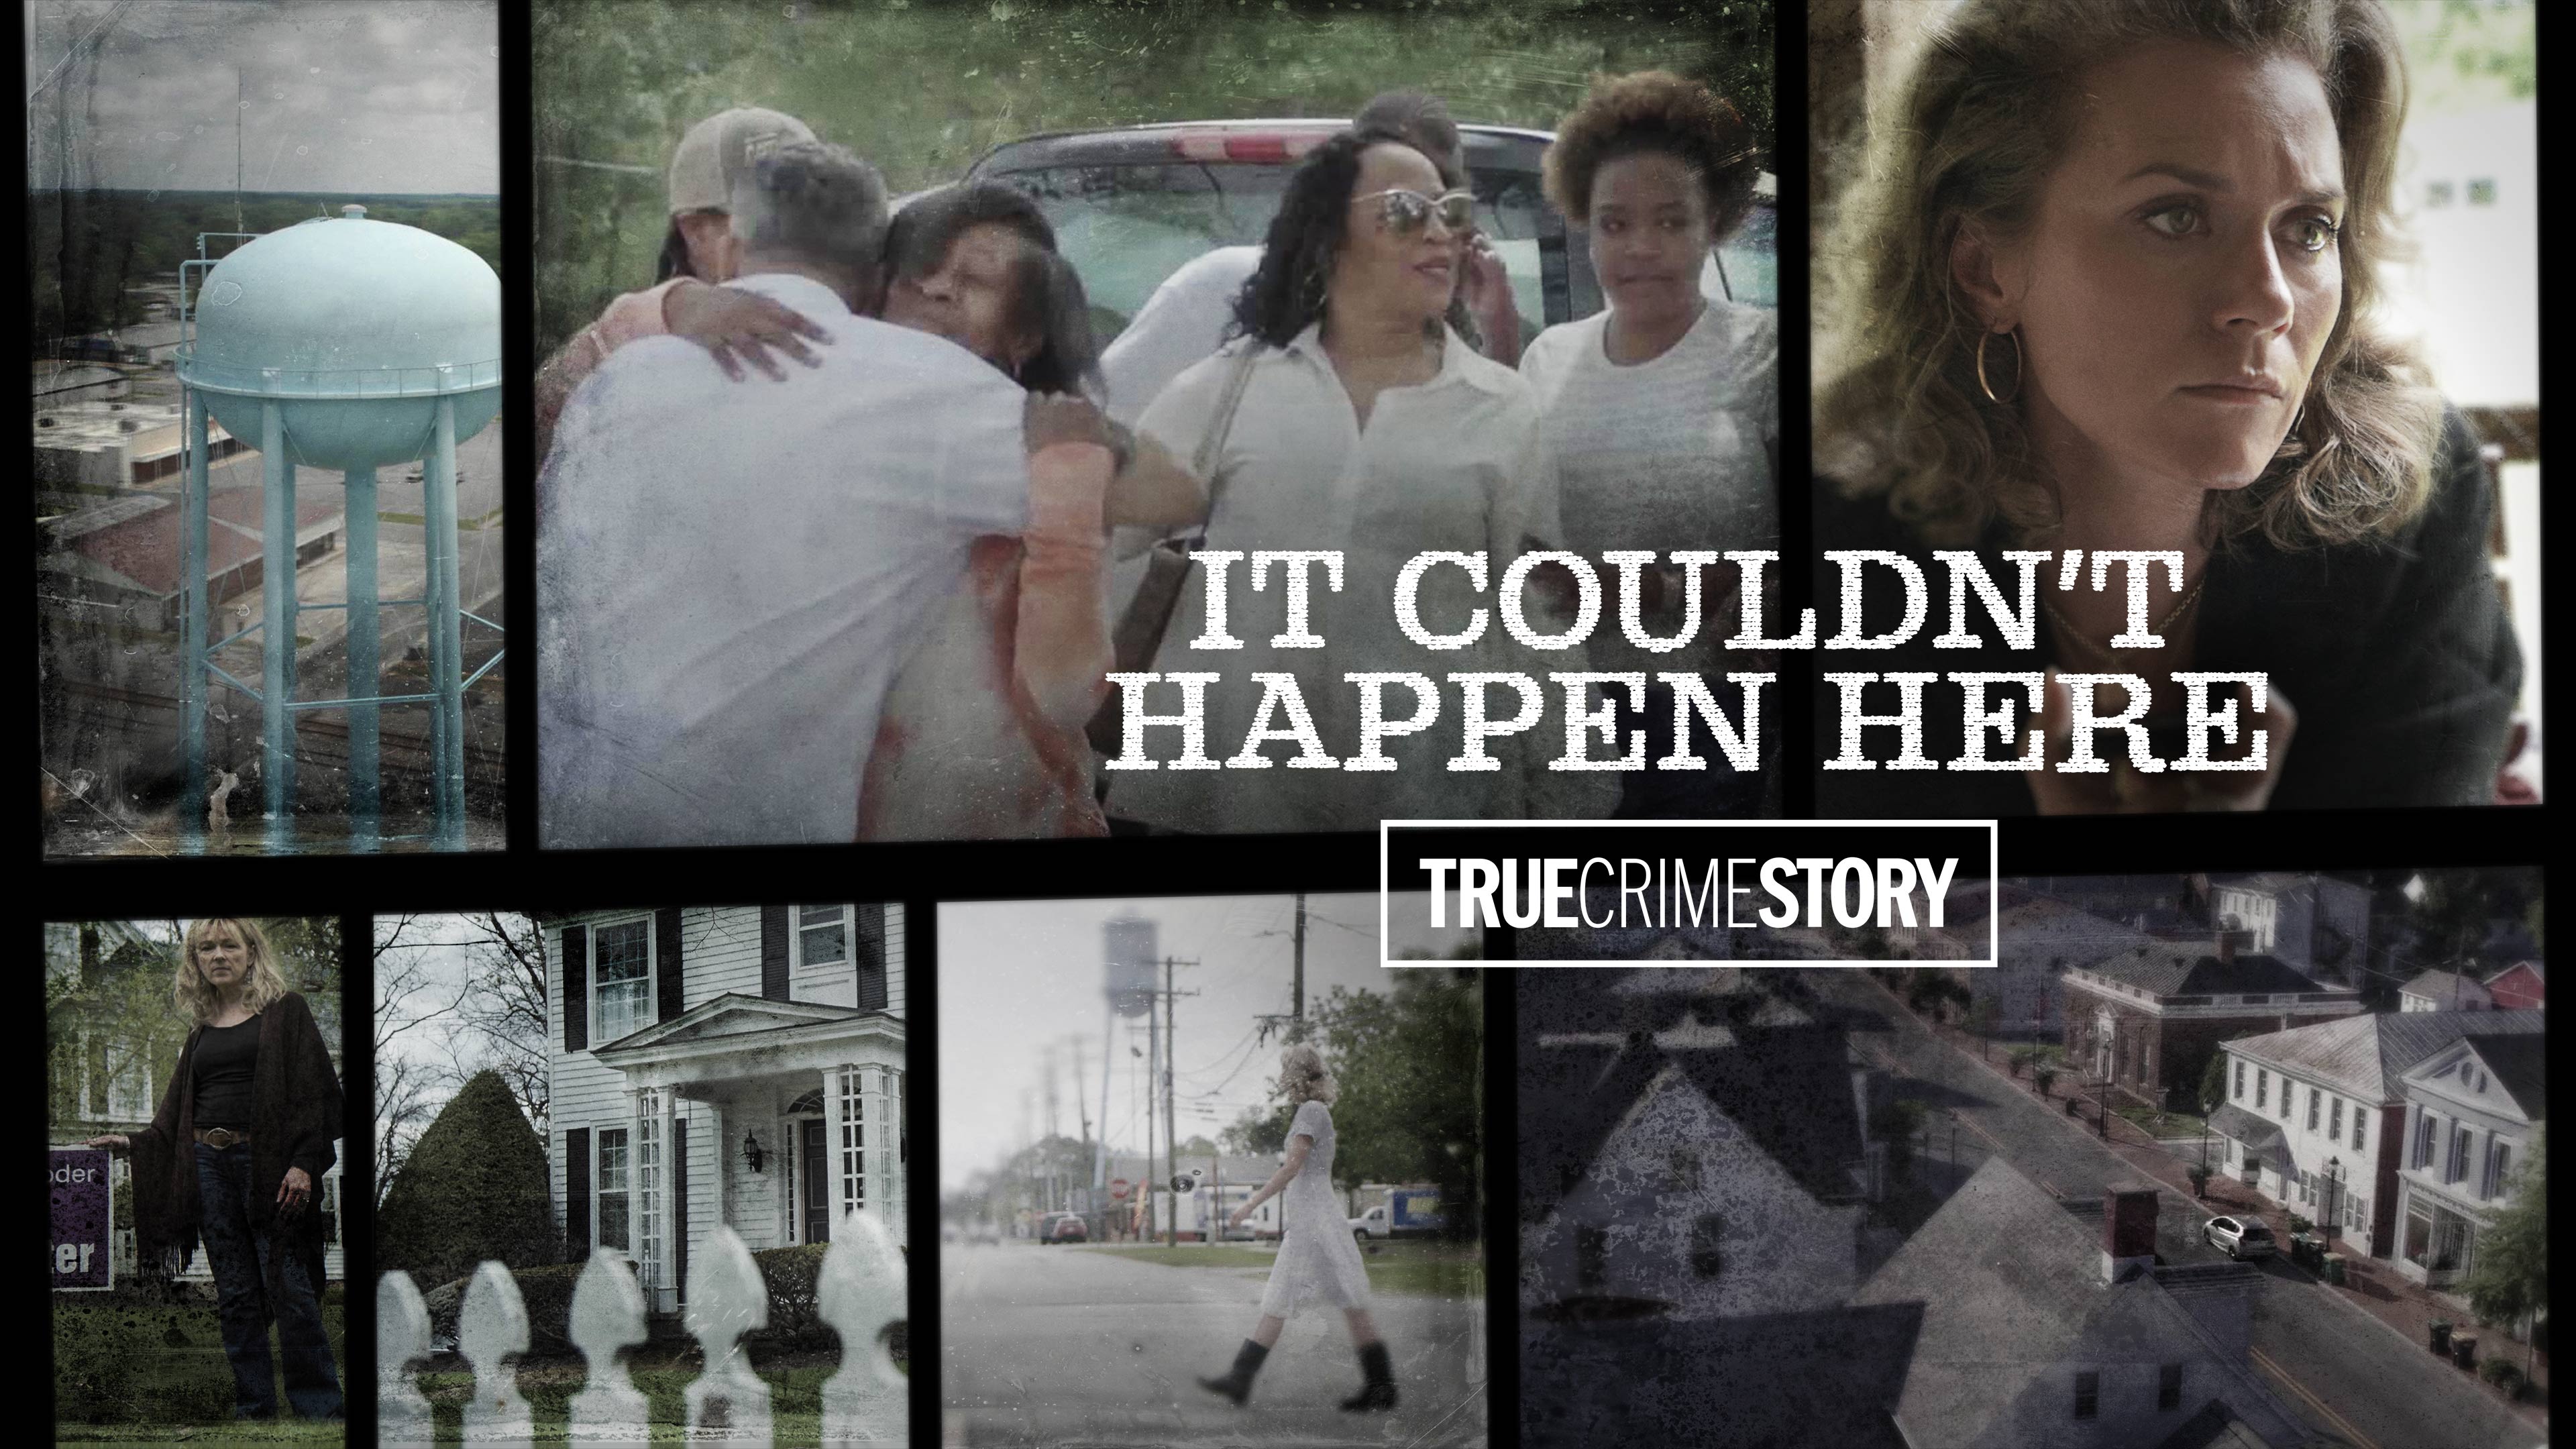 Watch True Crime Story: It Couldn't Happen Here Online | Stream Full Episodes